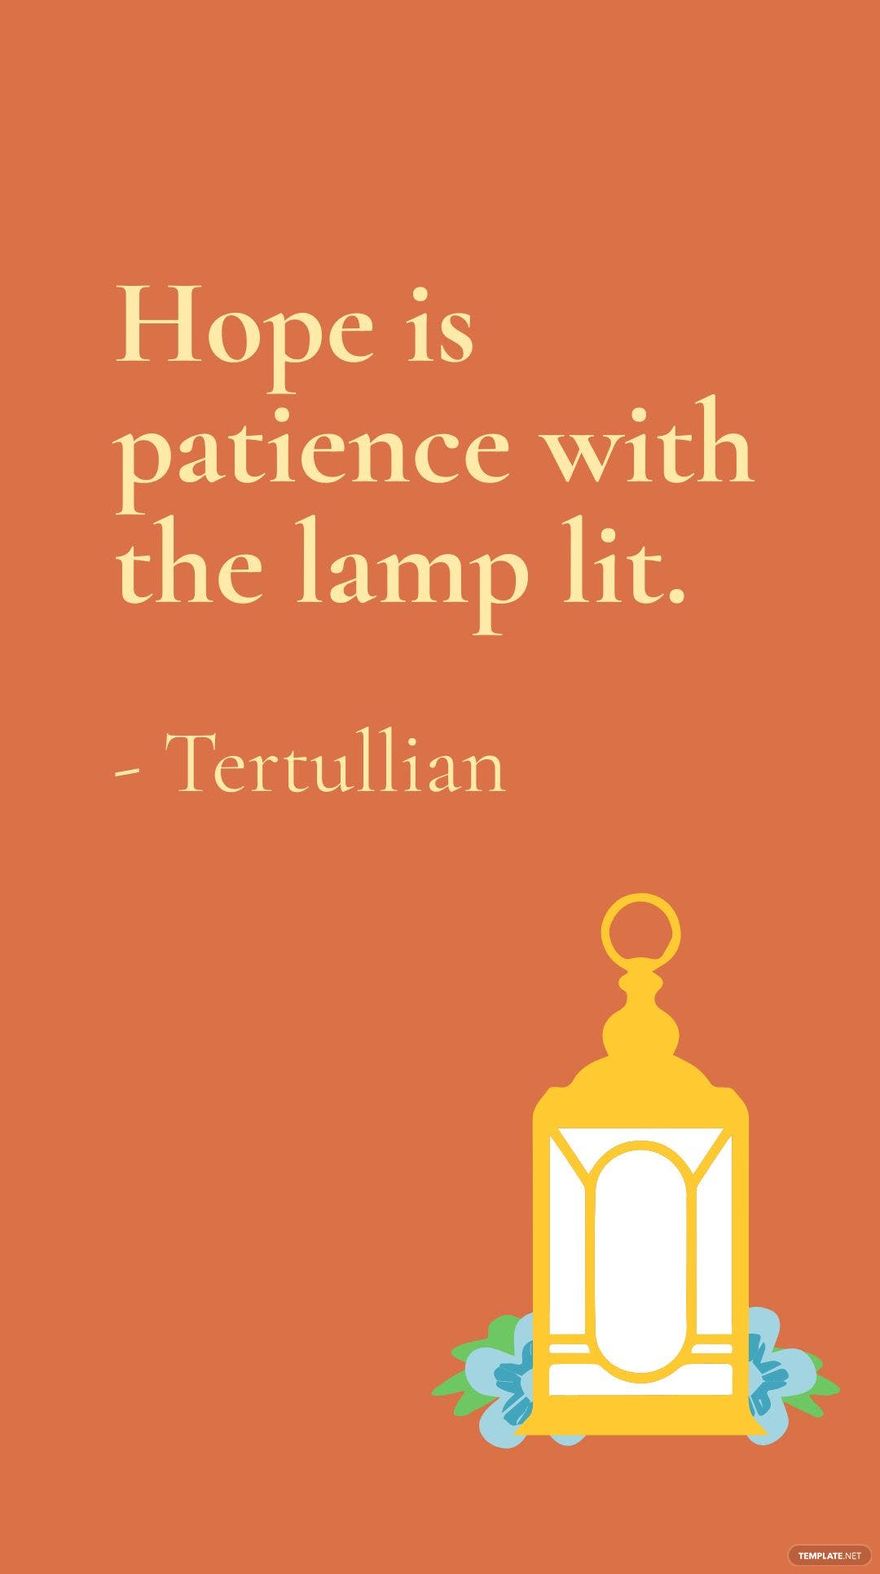 Tertullian - Hope is patience with the lamp lit. in JPG